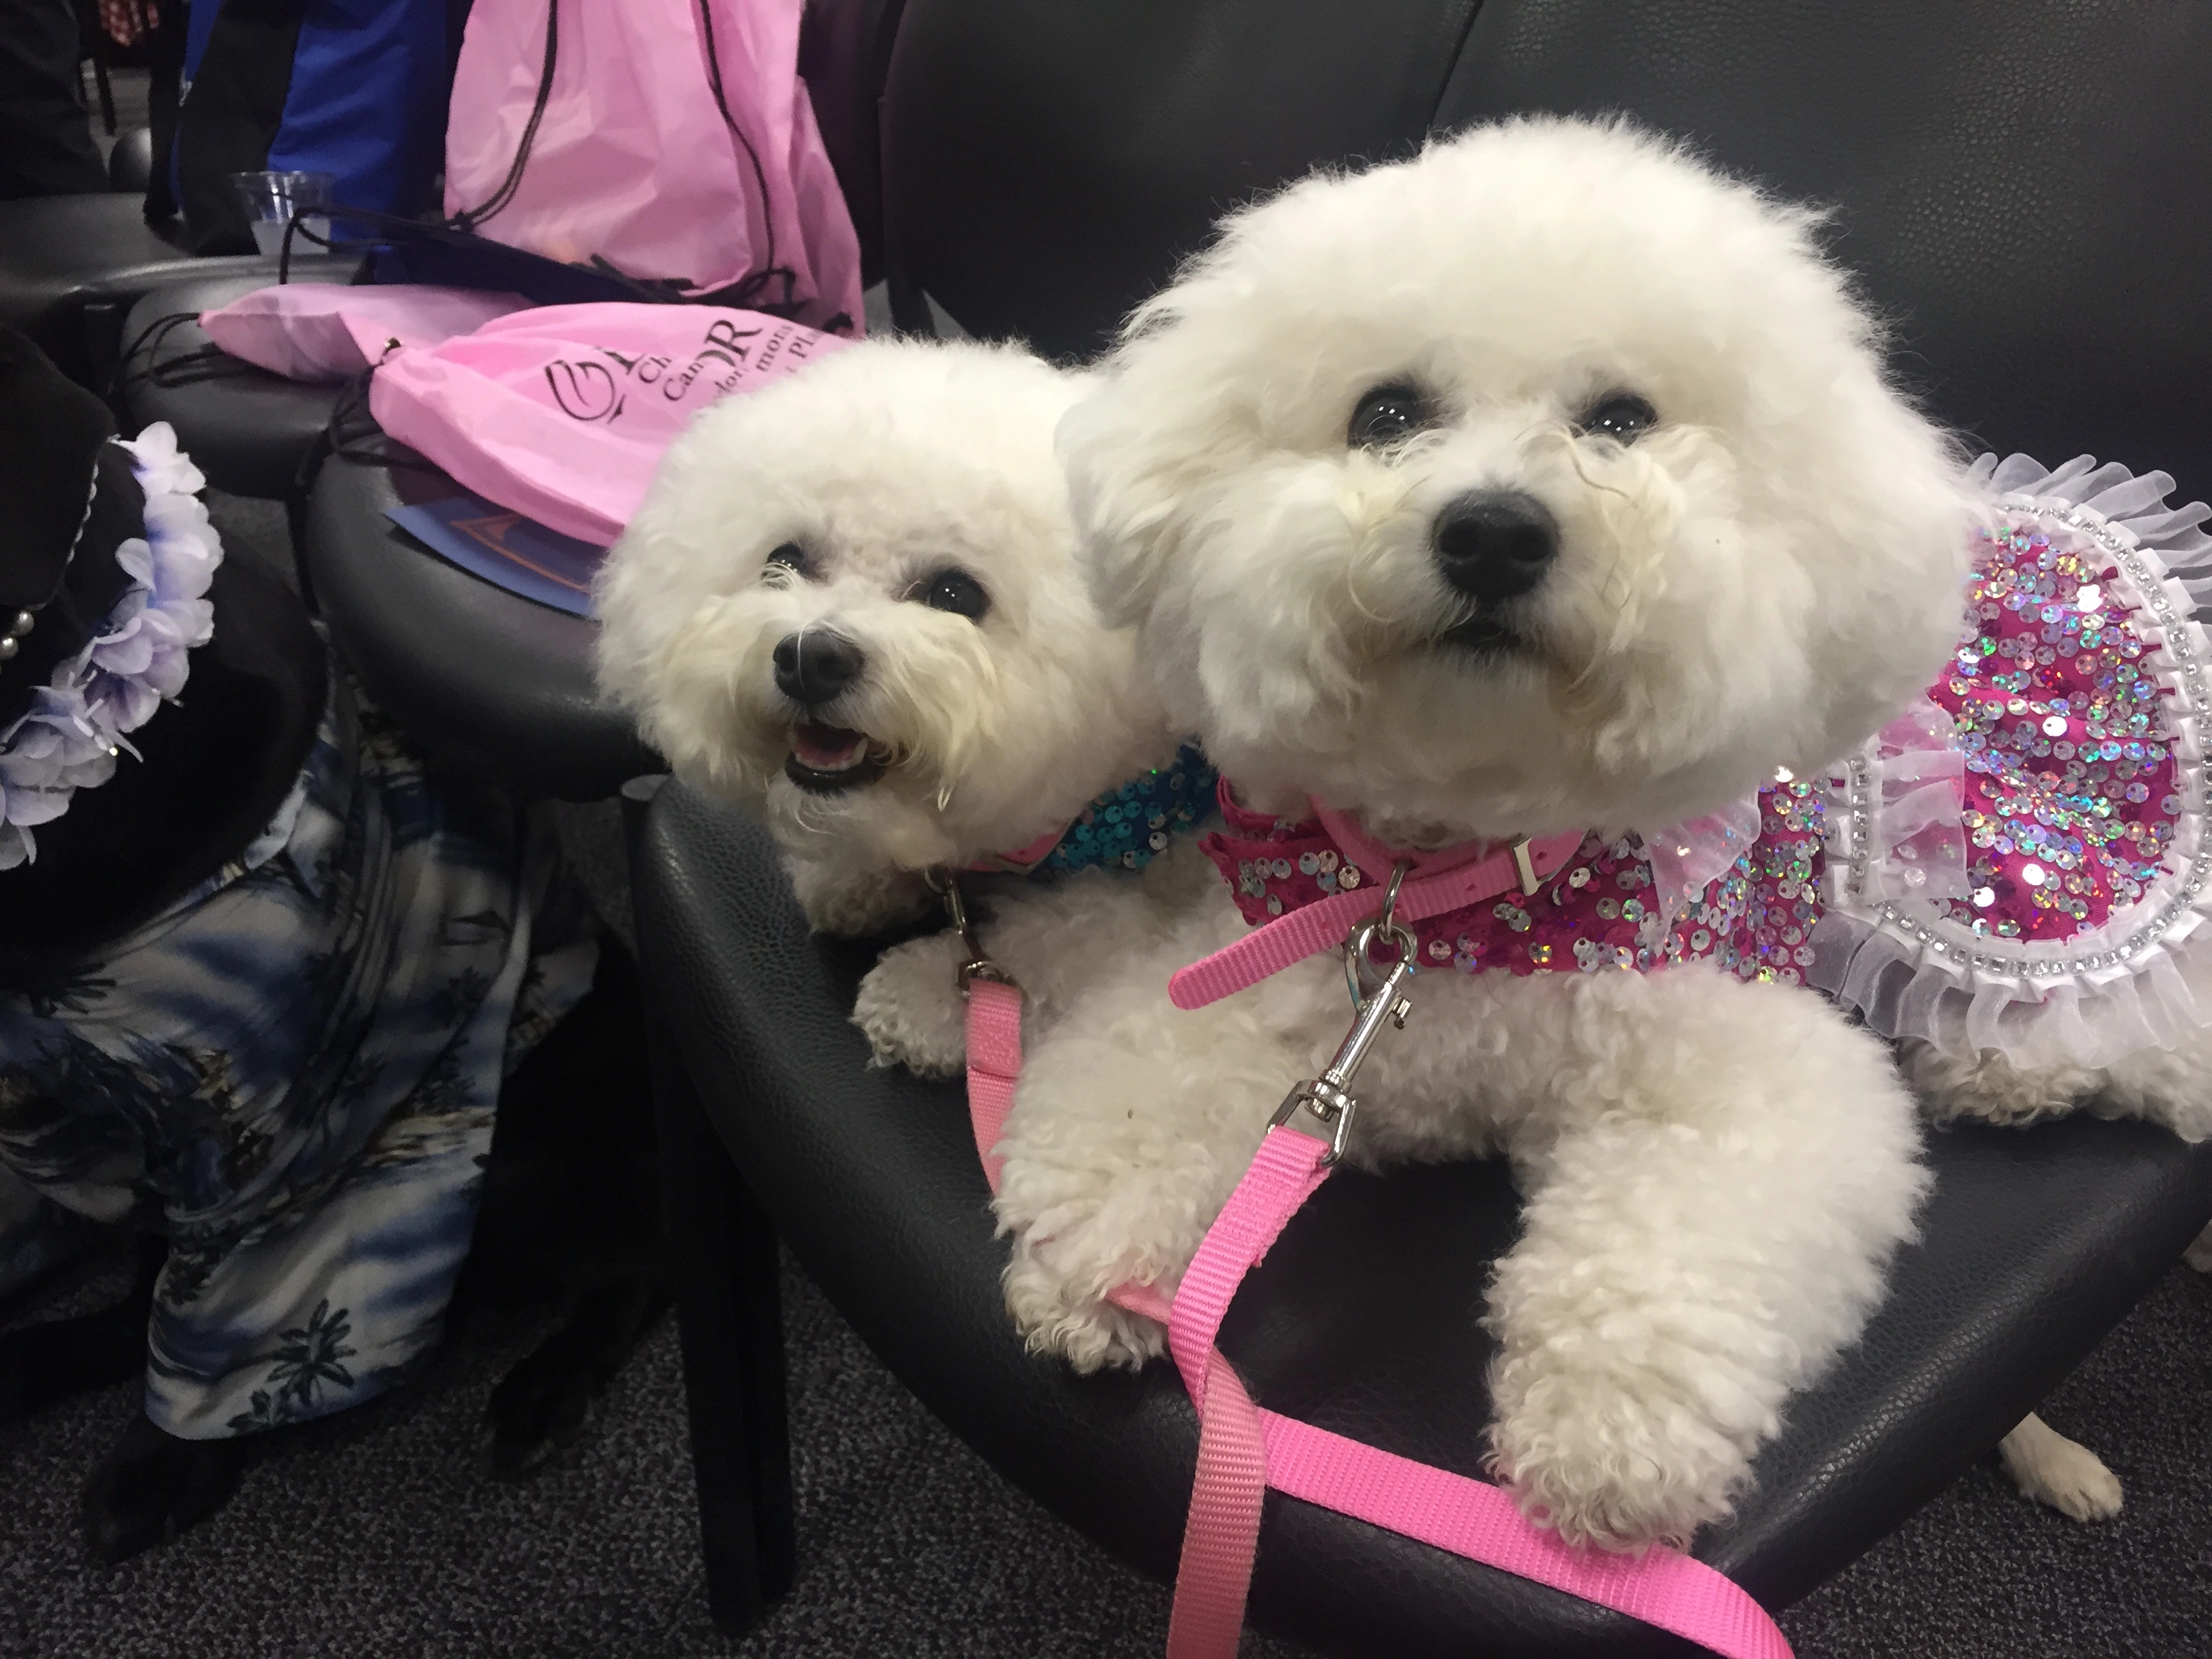 Sweet pooches bring cheer to hospital staff and patients